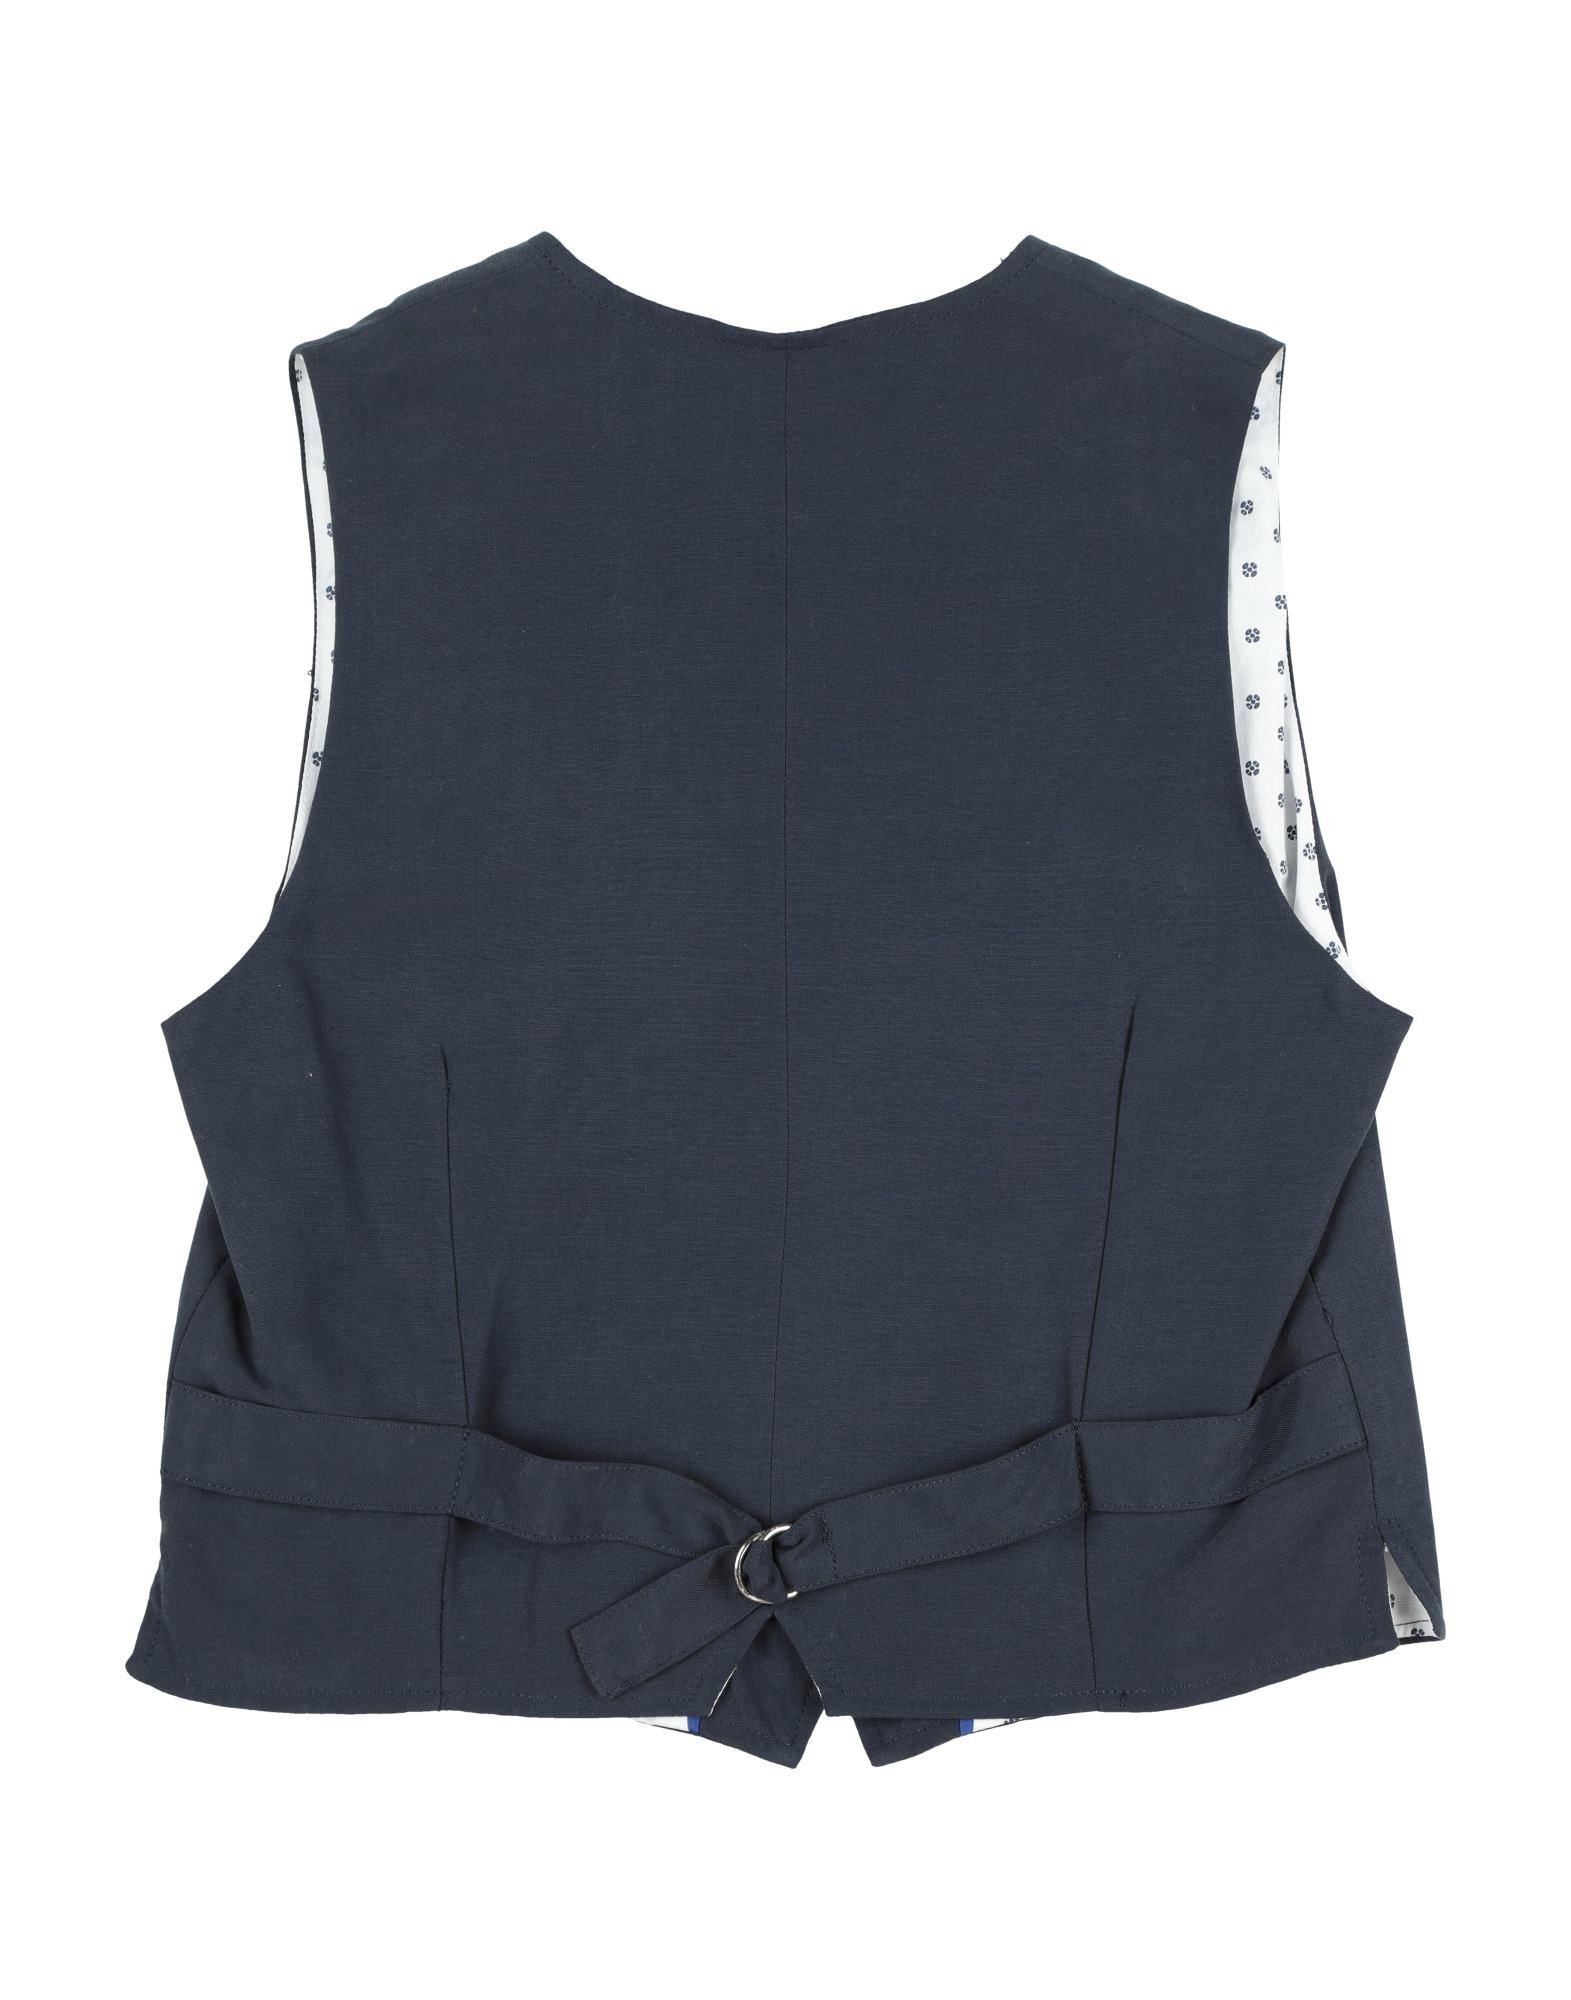 plain weave, logo, contrasting applications, solid colour, multipockets, 4 buttons, v-neck, single-breasted , sleeveless, fully lined, back split, wash at 30° c, dry cleanable, iron at 110° c max, do not bleach, do not tumble dry